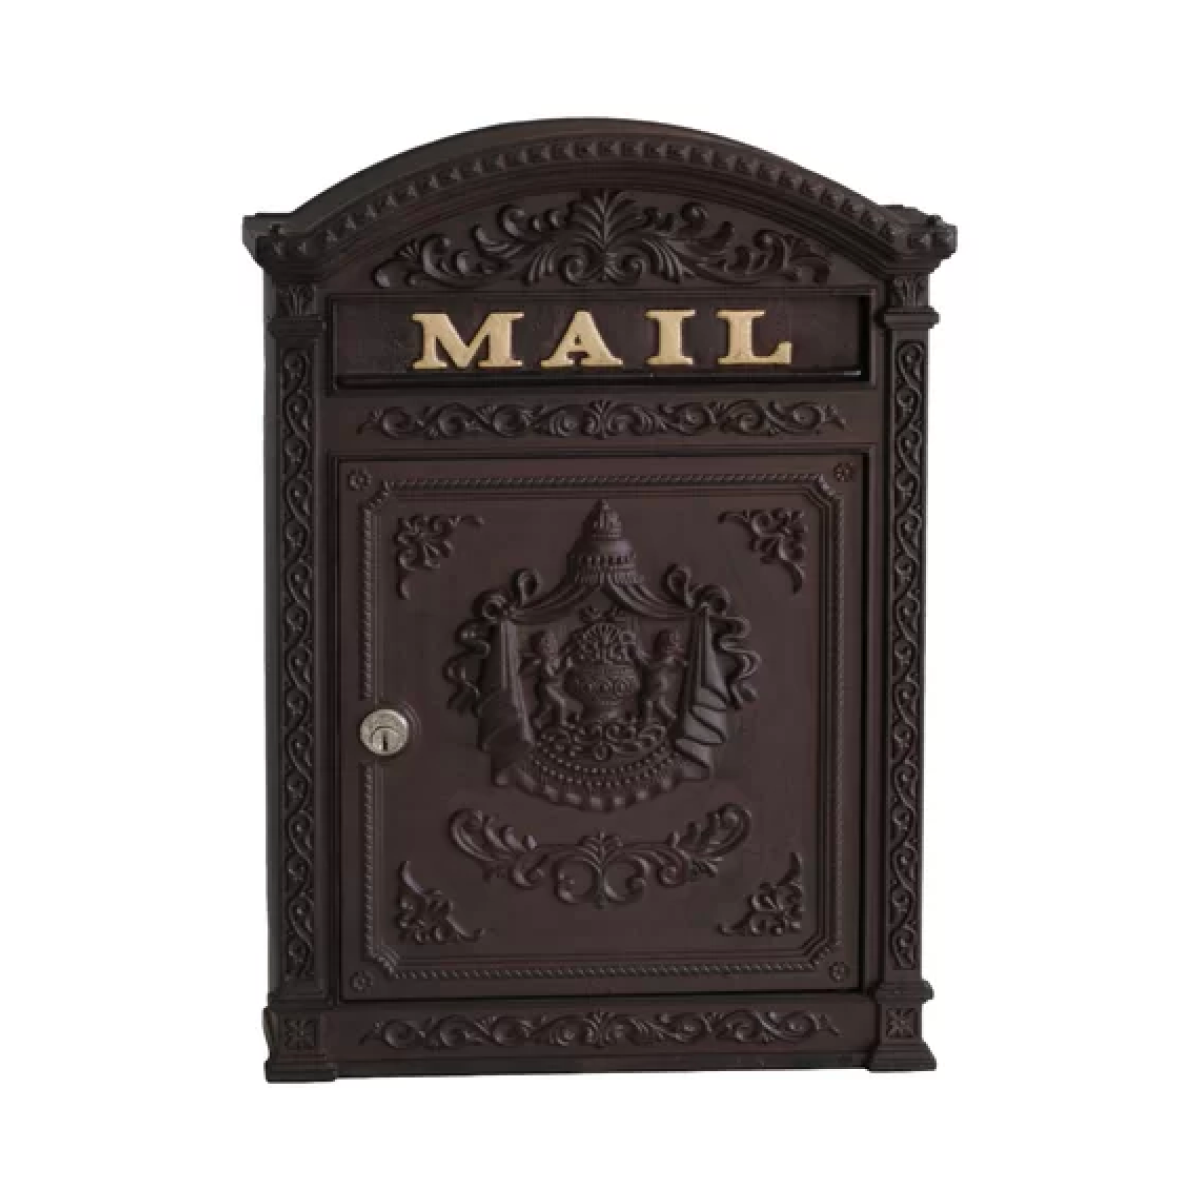 Ecco 6 Victorian Wall Mount Mailbox Product Image